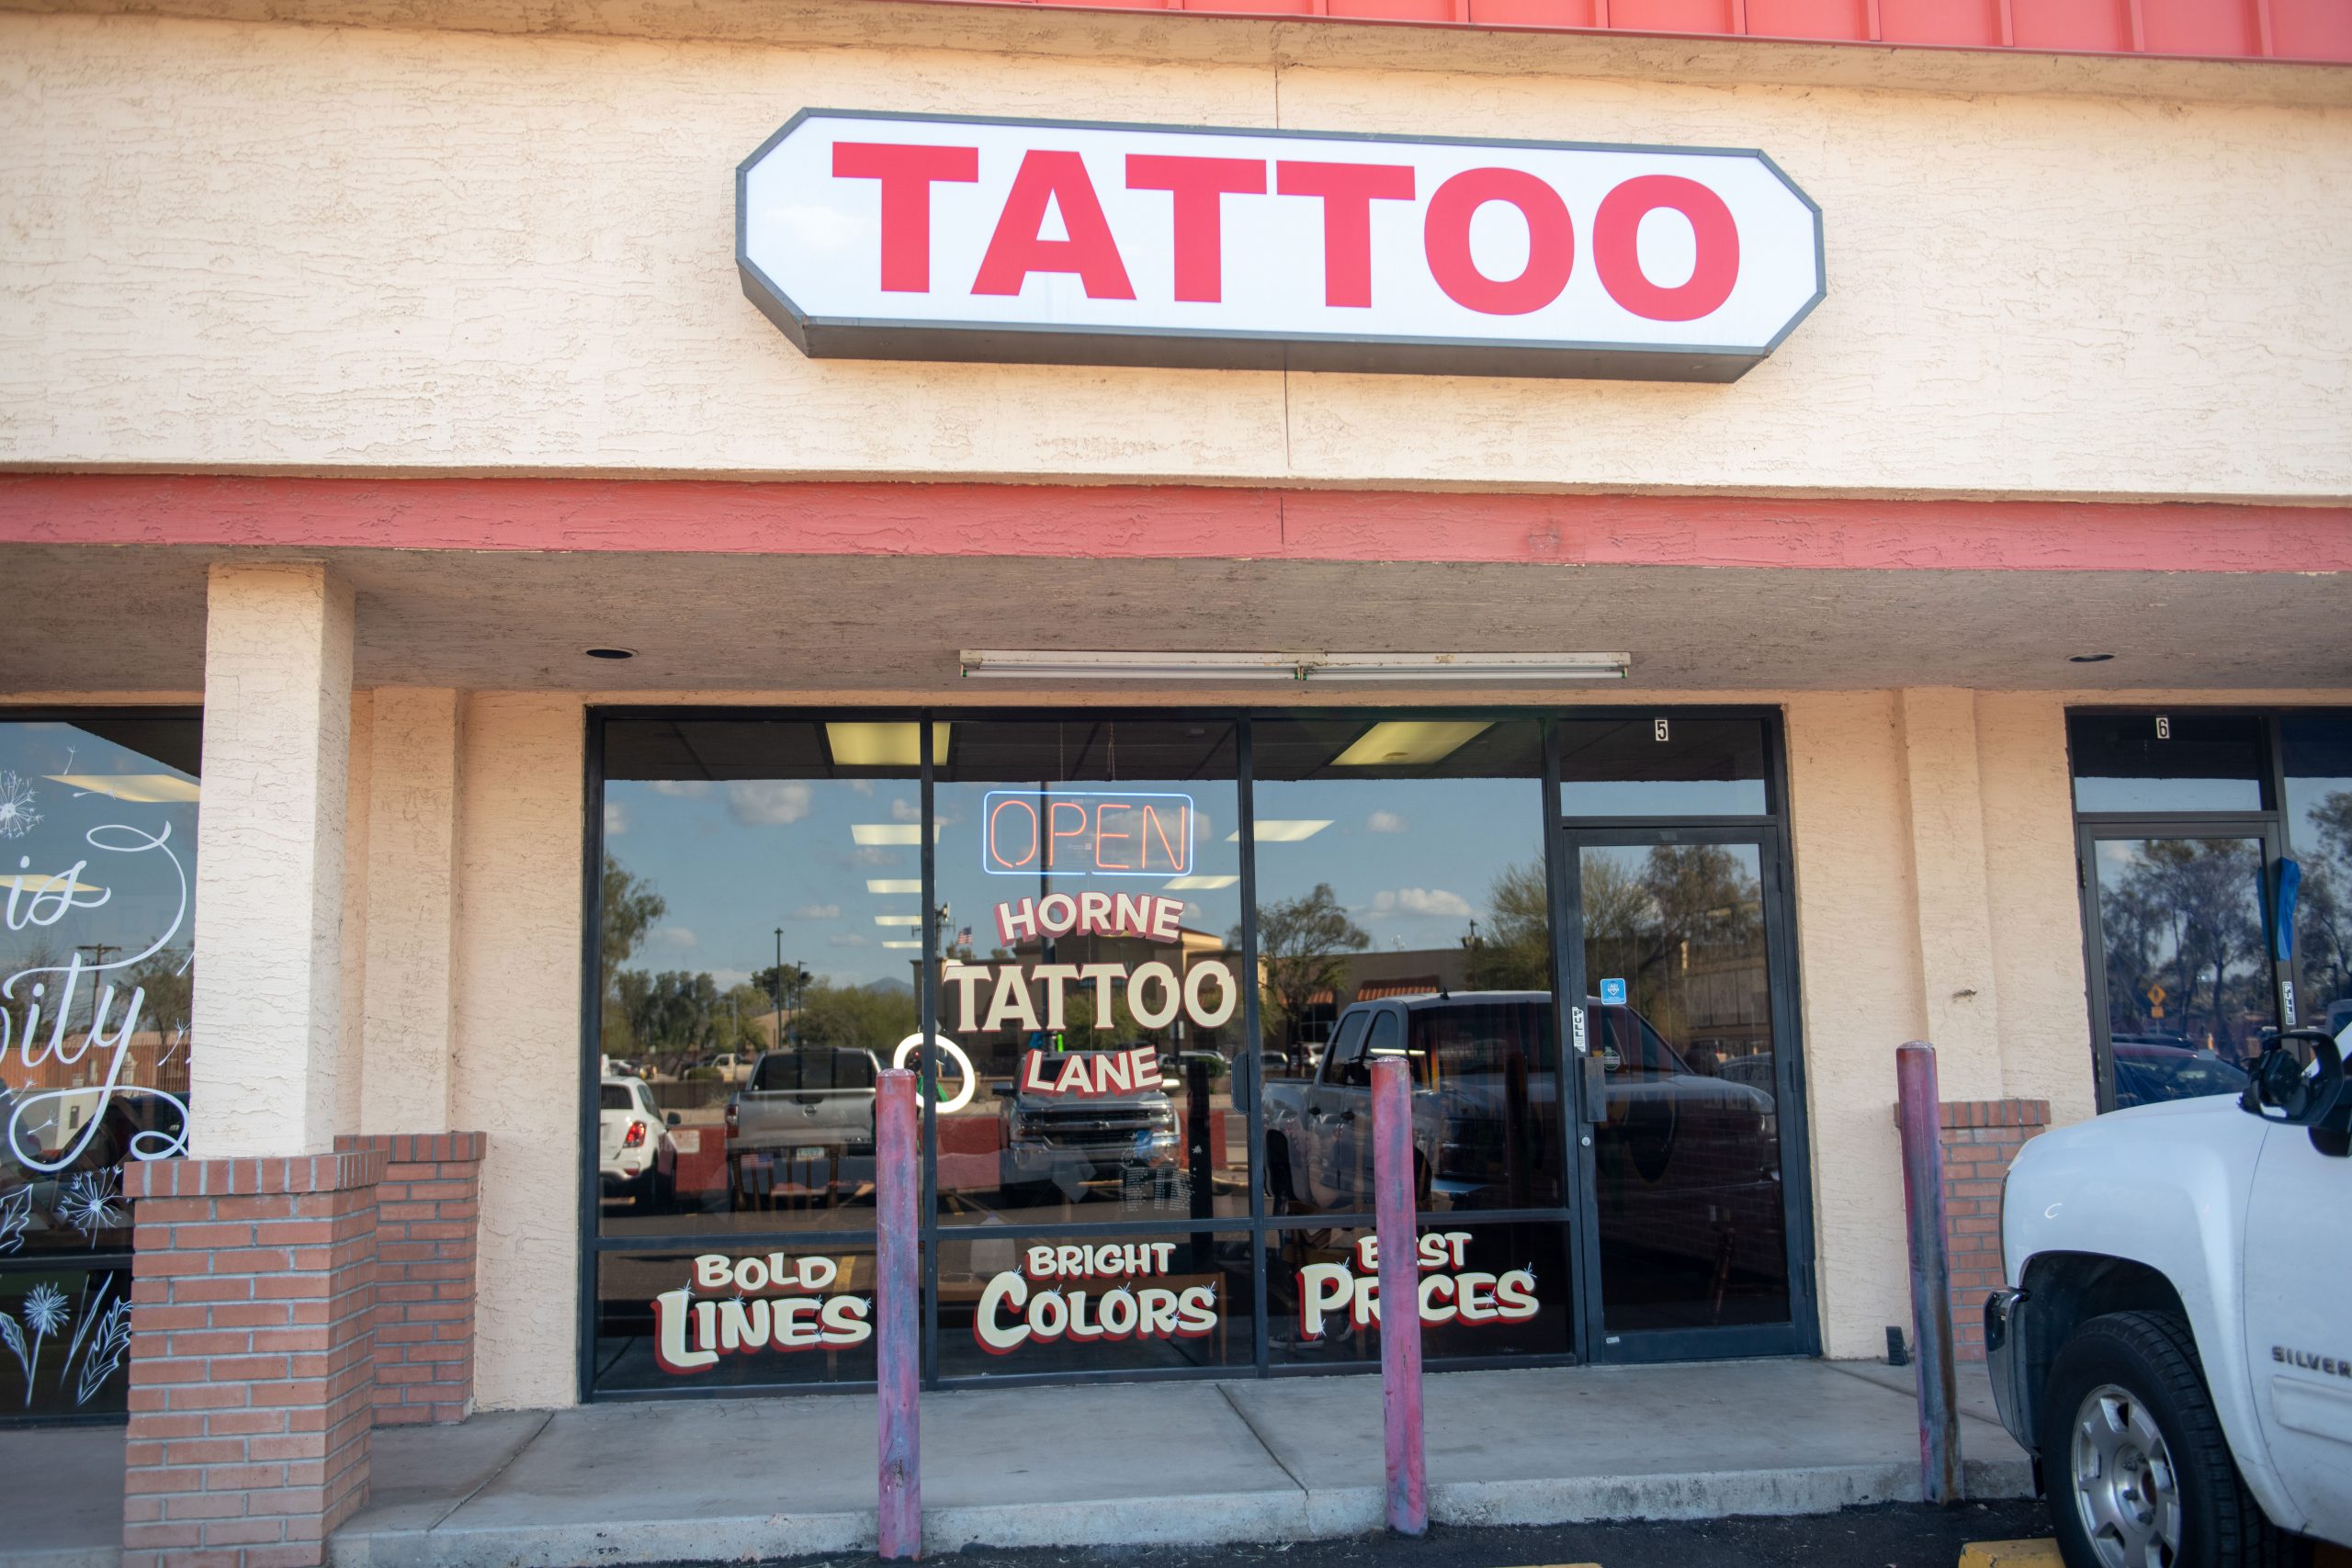 Community Tattoo Artist Opens Shop | O'odham Action News: Home